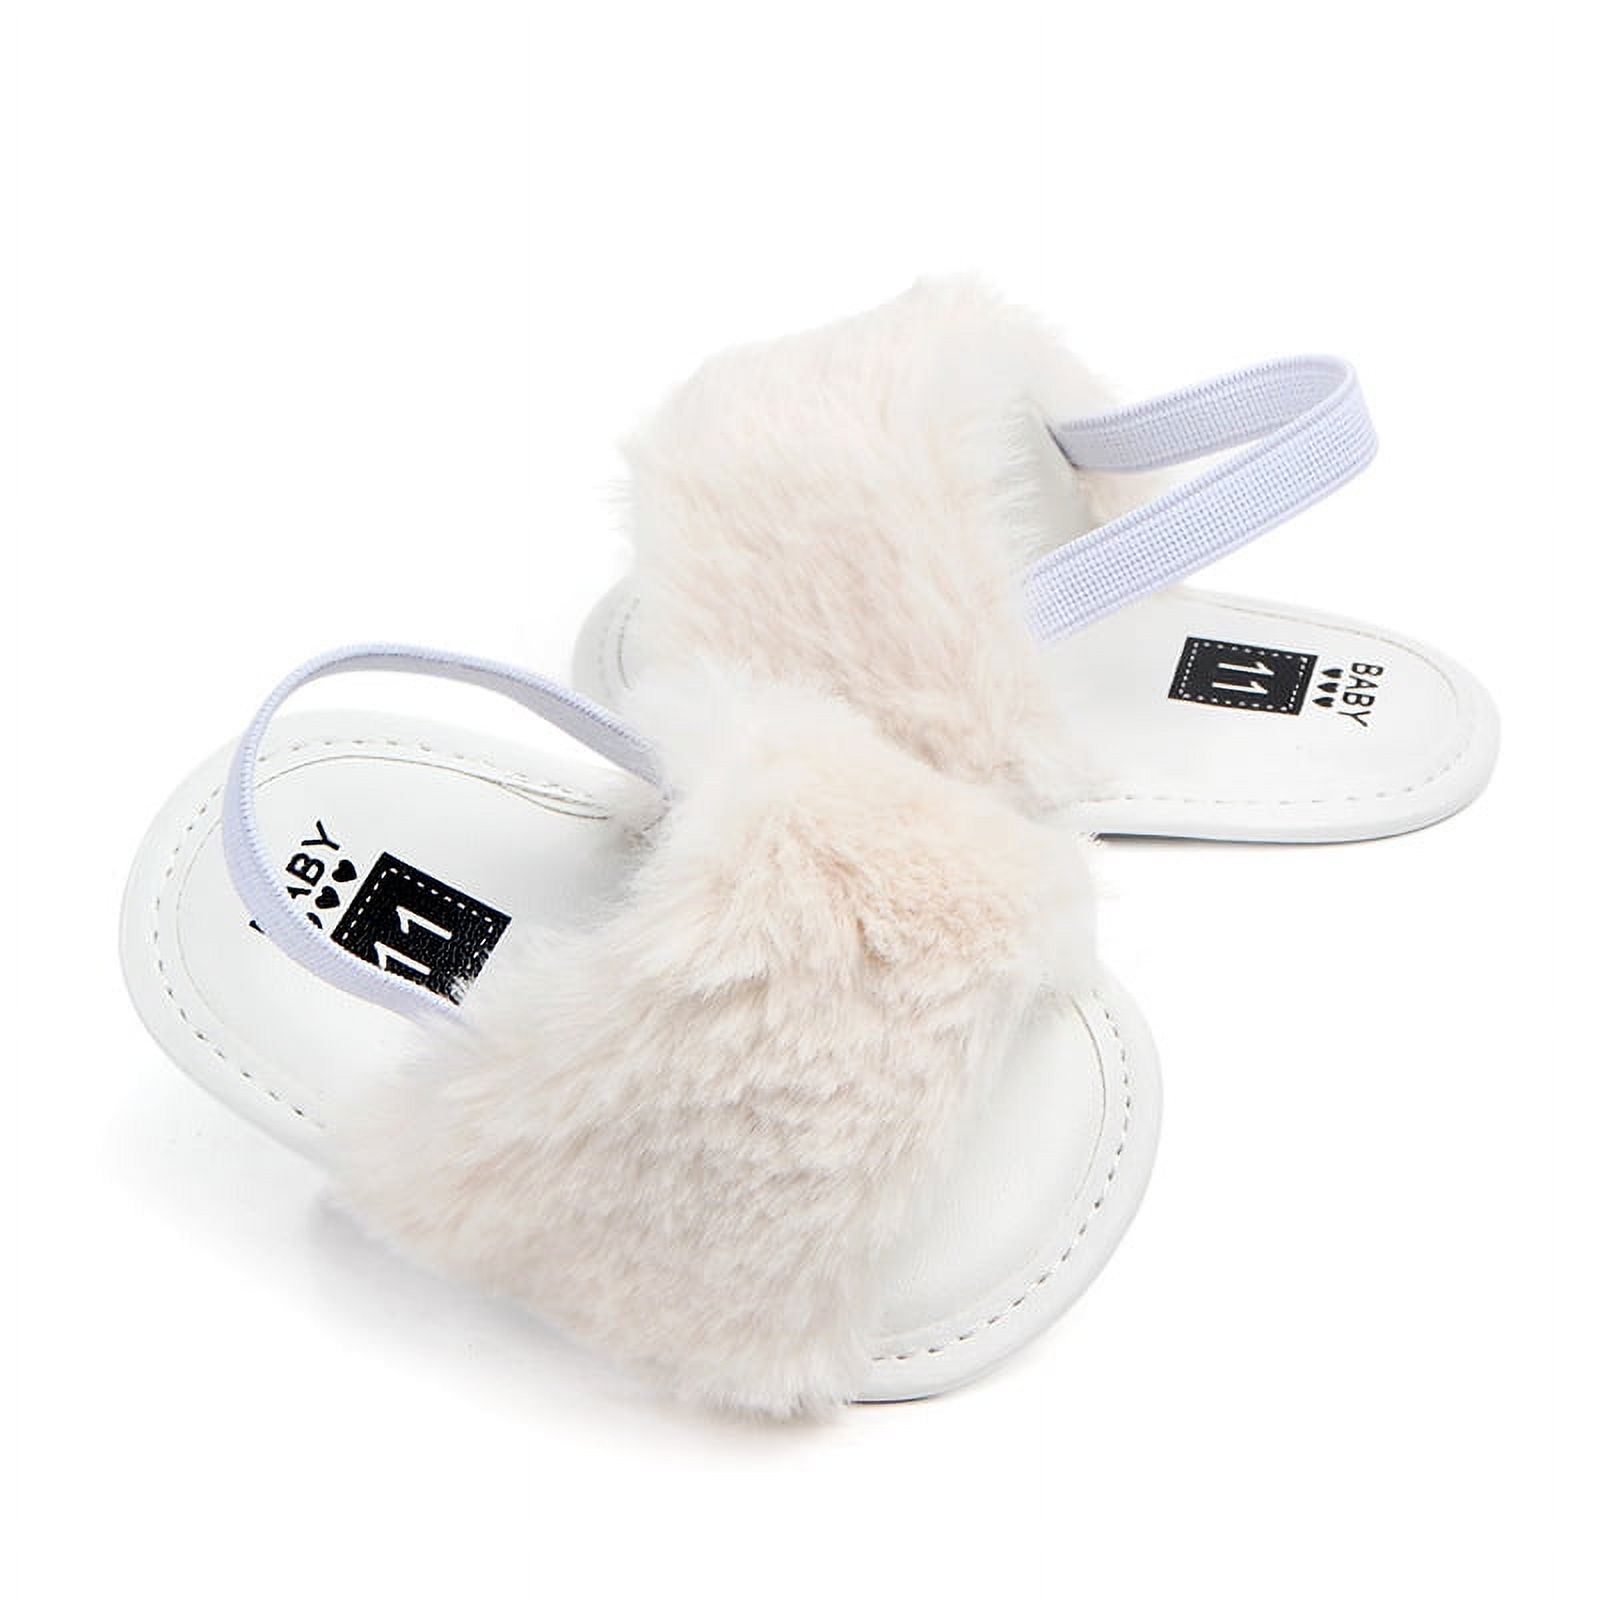 Baby Girls Summer Sandals Non Slip Soft Sole Infant Dress Shoes Newborn Toddler Furry Fur First Walker Crib Shoes House Slipper - image 3 of 5